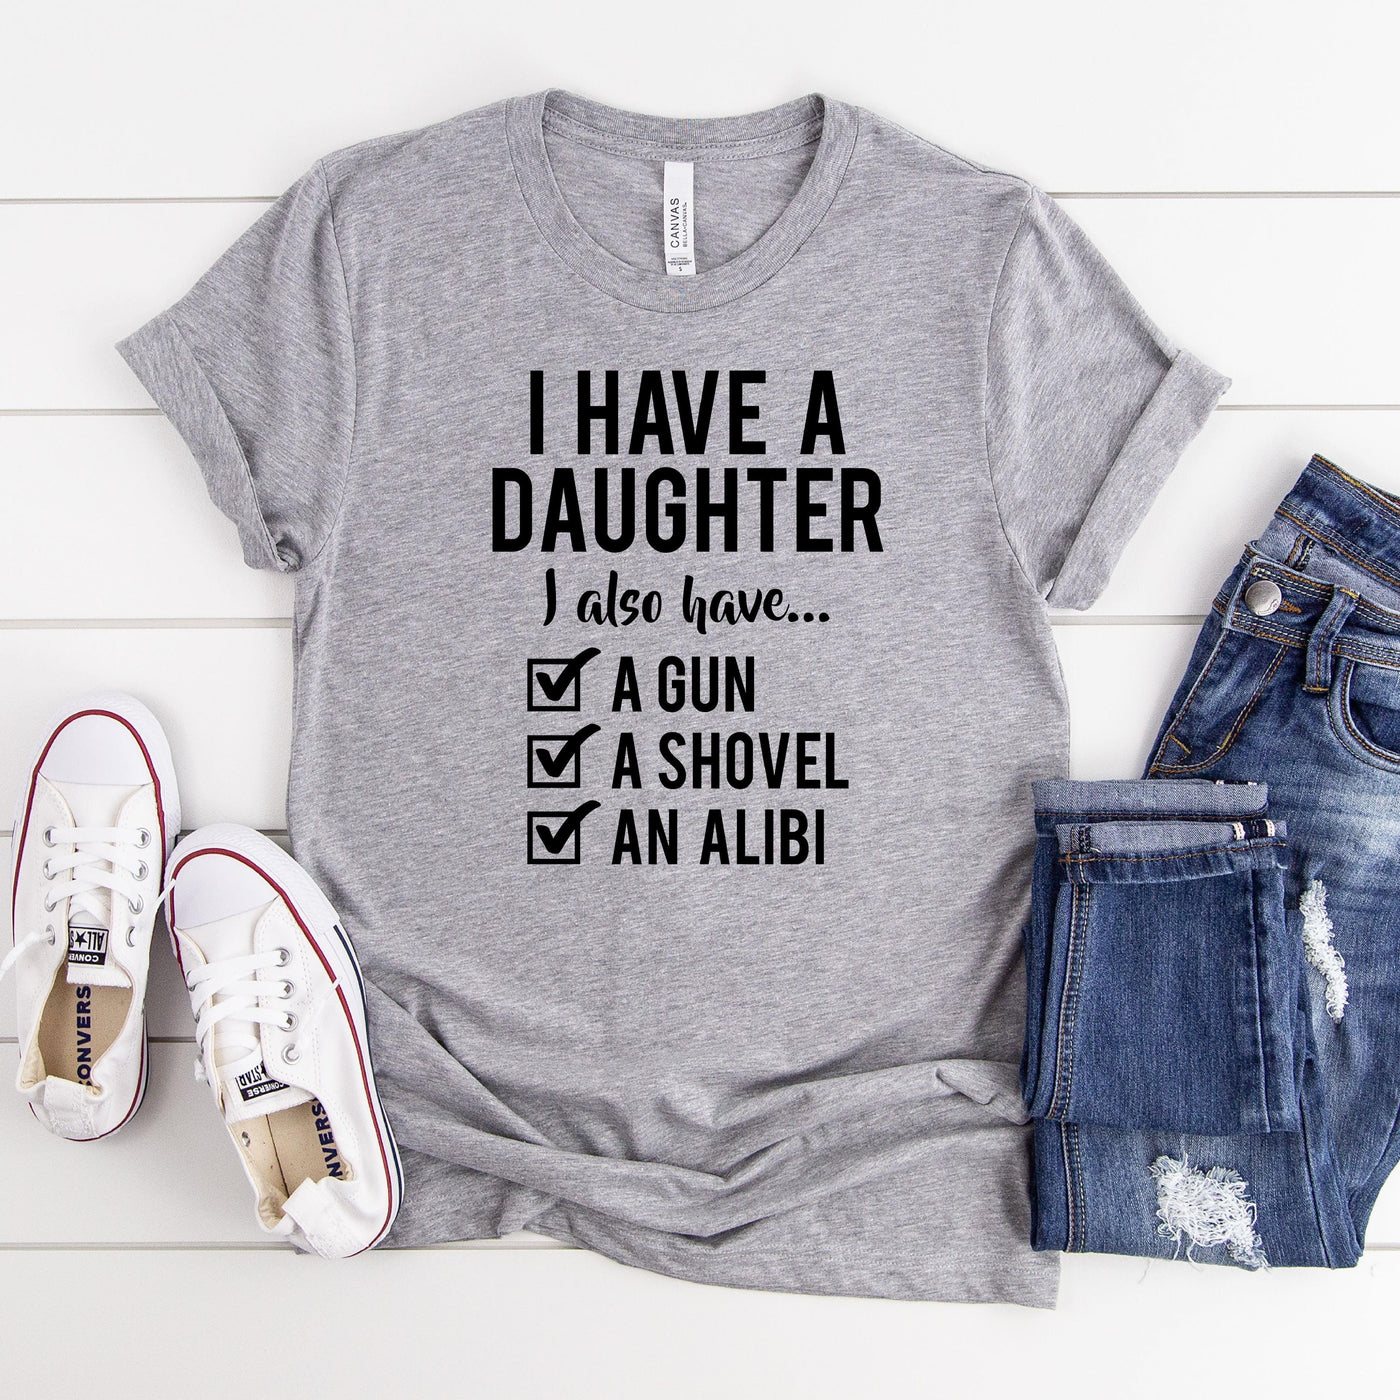 I have a daughter - Grace & Co. Designs 